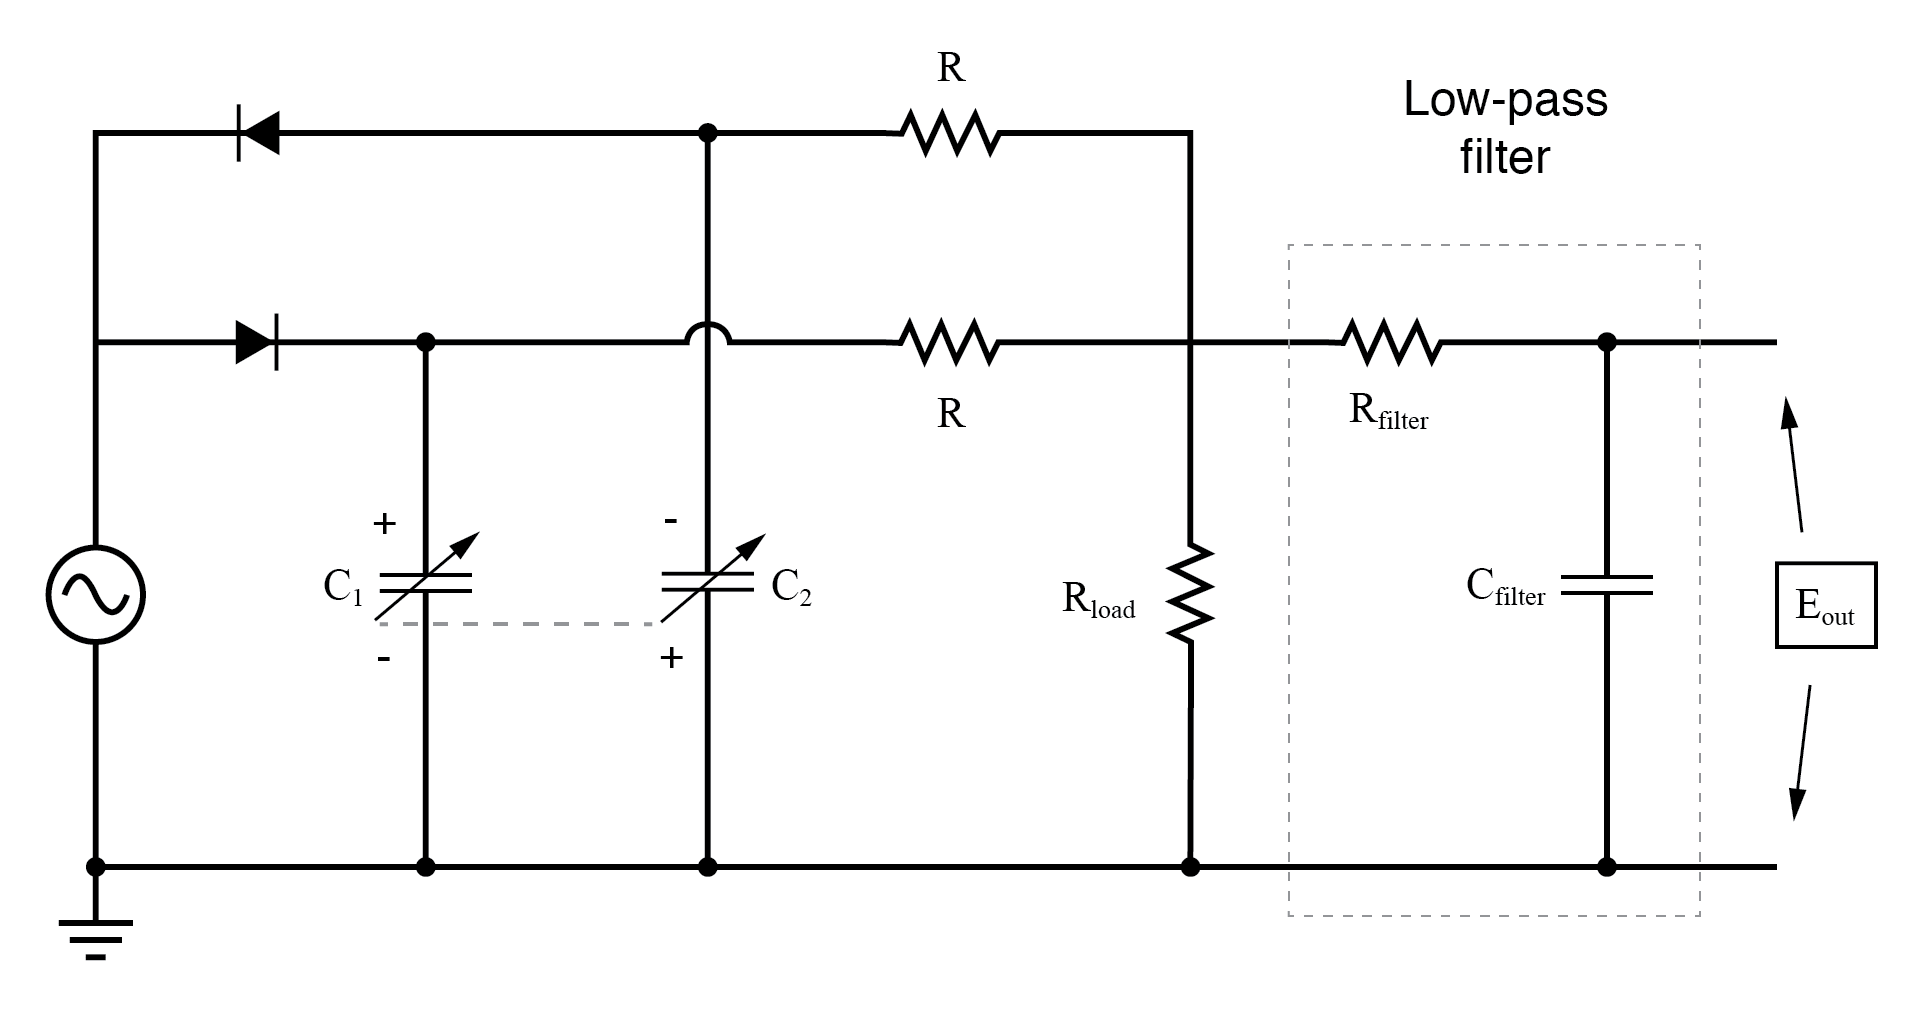 Addition of low-pass filter to “twin-T” feeds pure DC to measurement indicator.